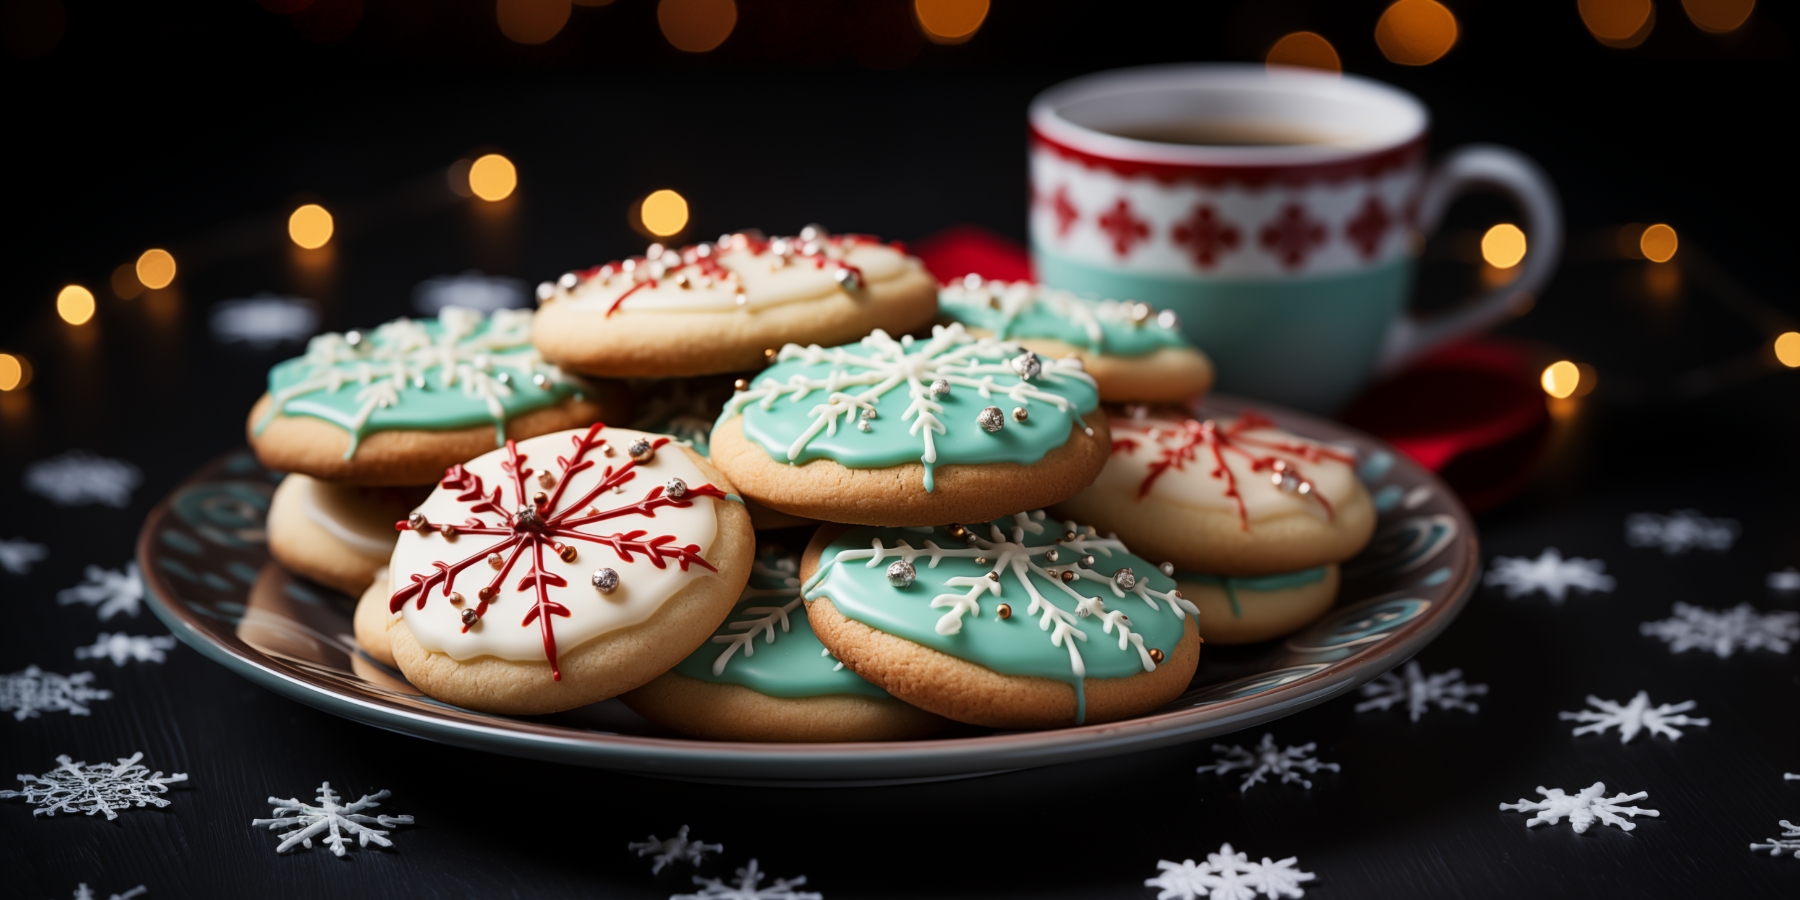 What is your go-to holiday treat?